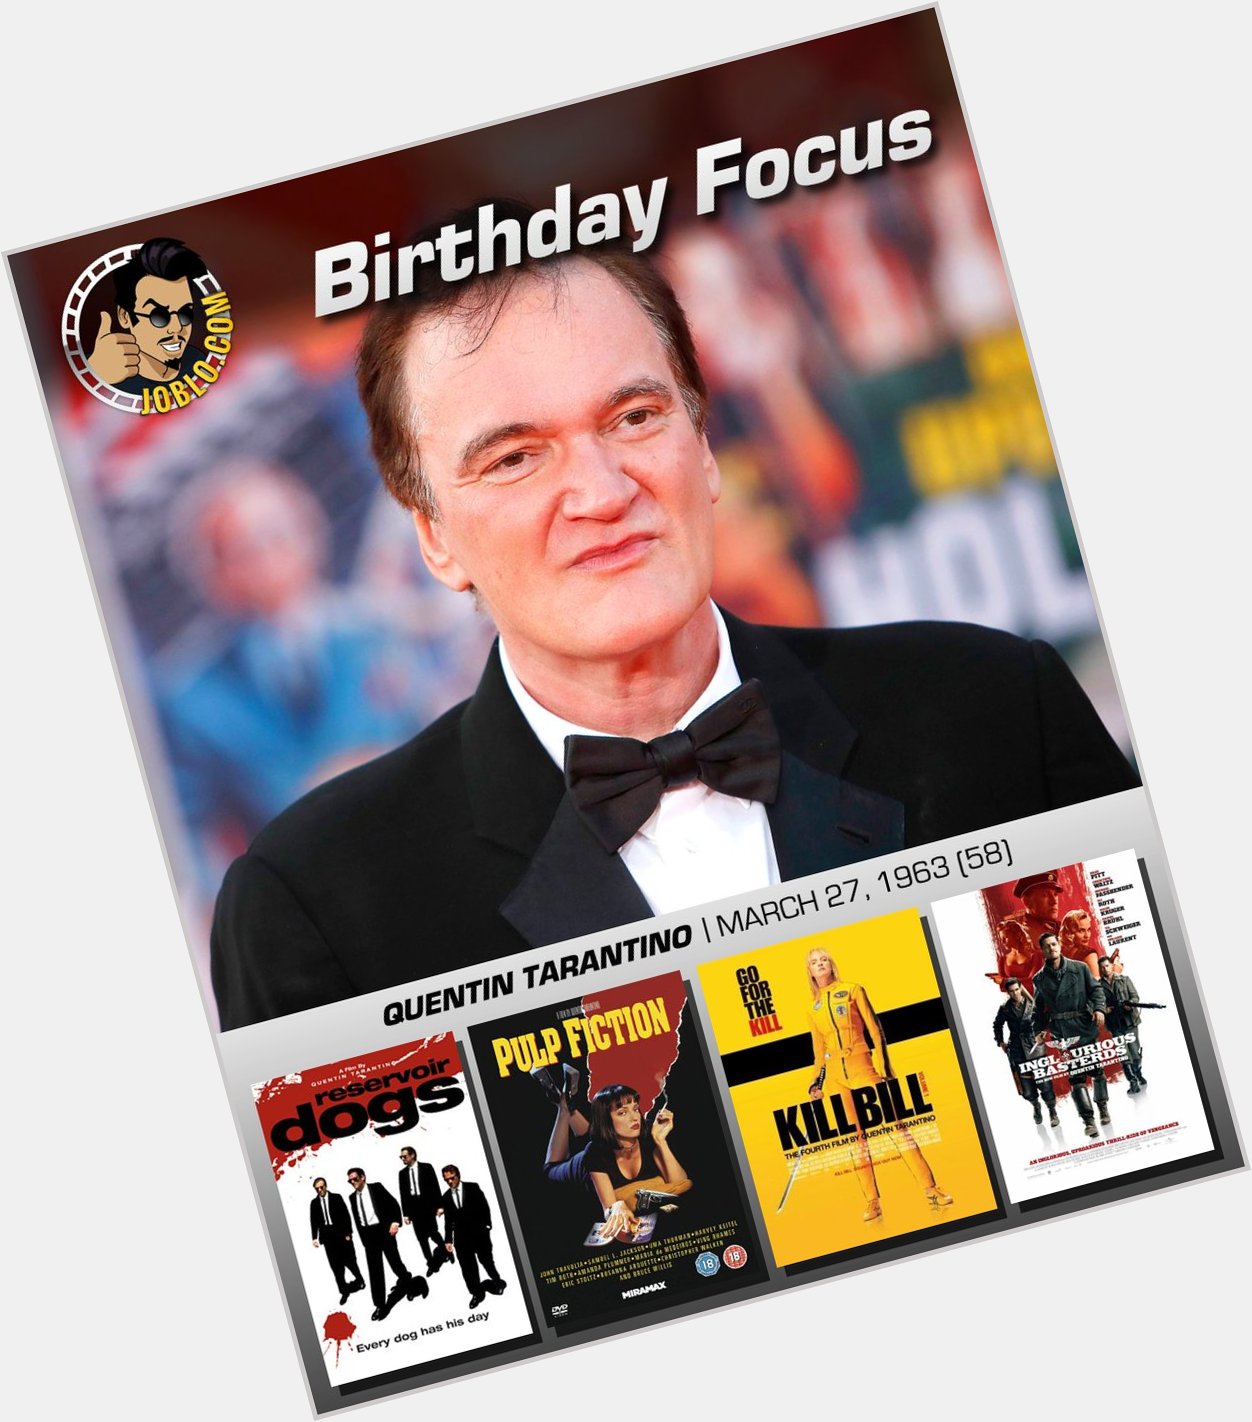 Wishing a very happy 58th birthday to Quentin Tarantino!

What is your favorite film of his? 